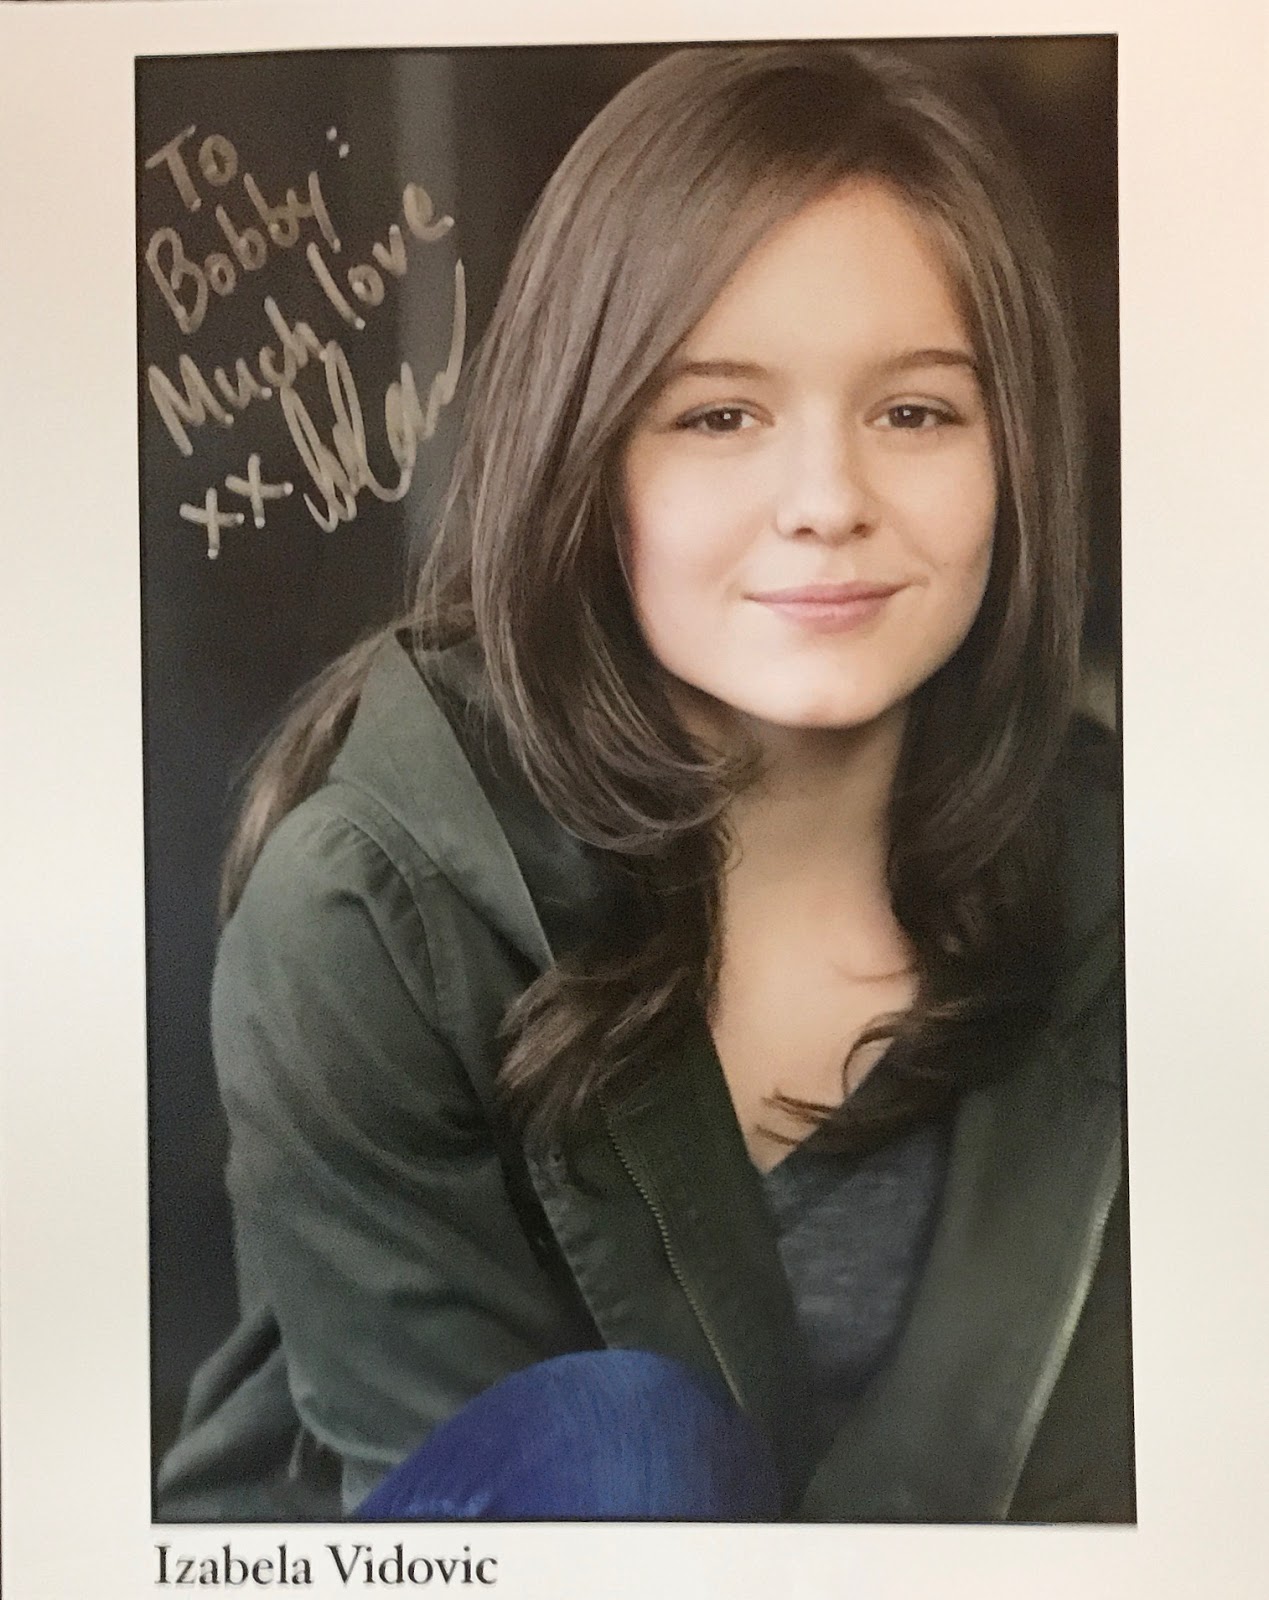 The first autograph I received today was from Izabela Vidovic who stars in ...